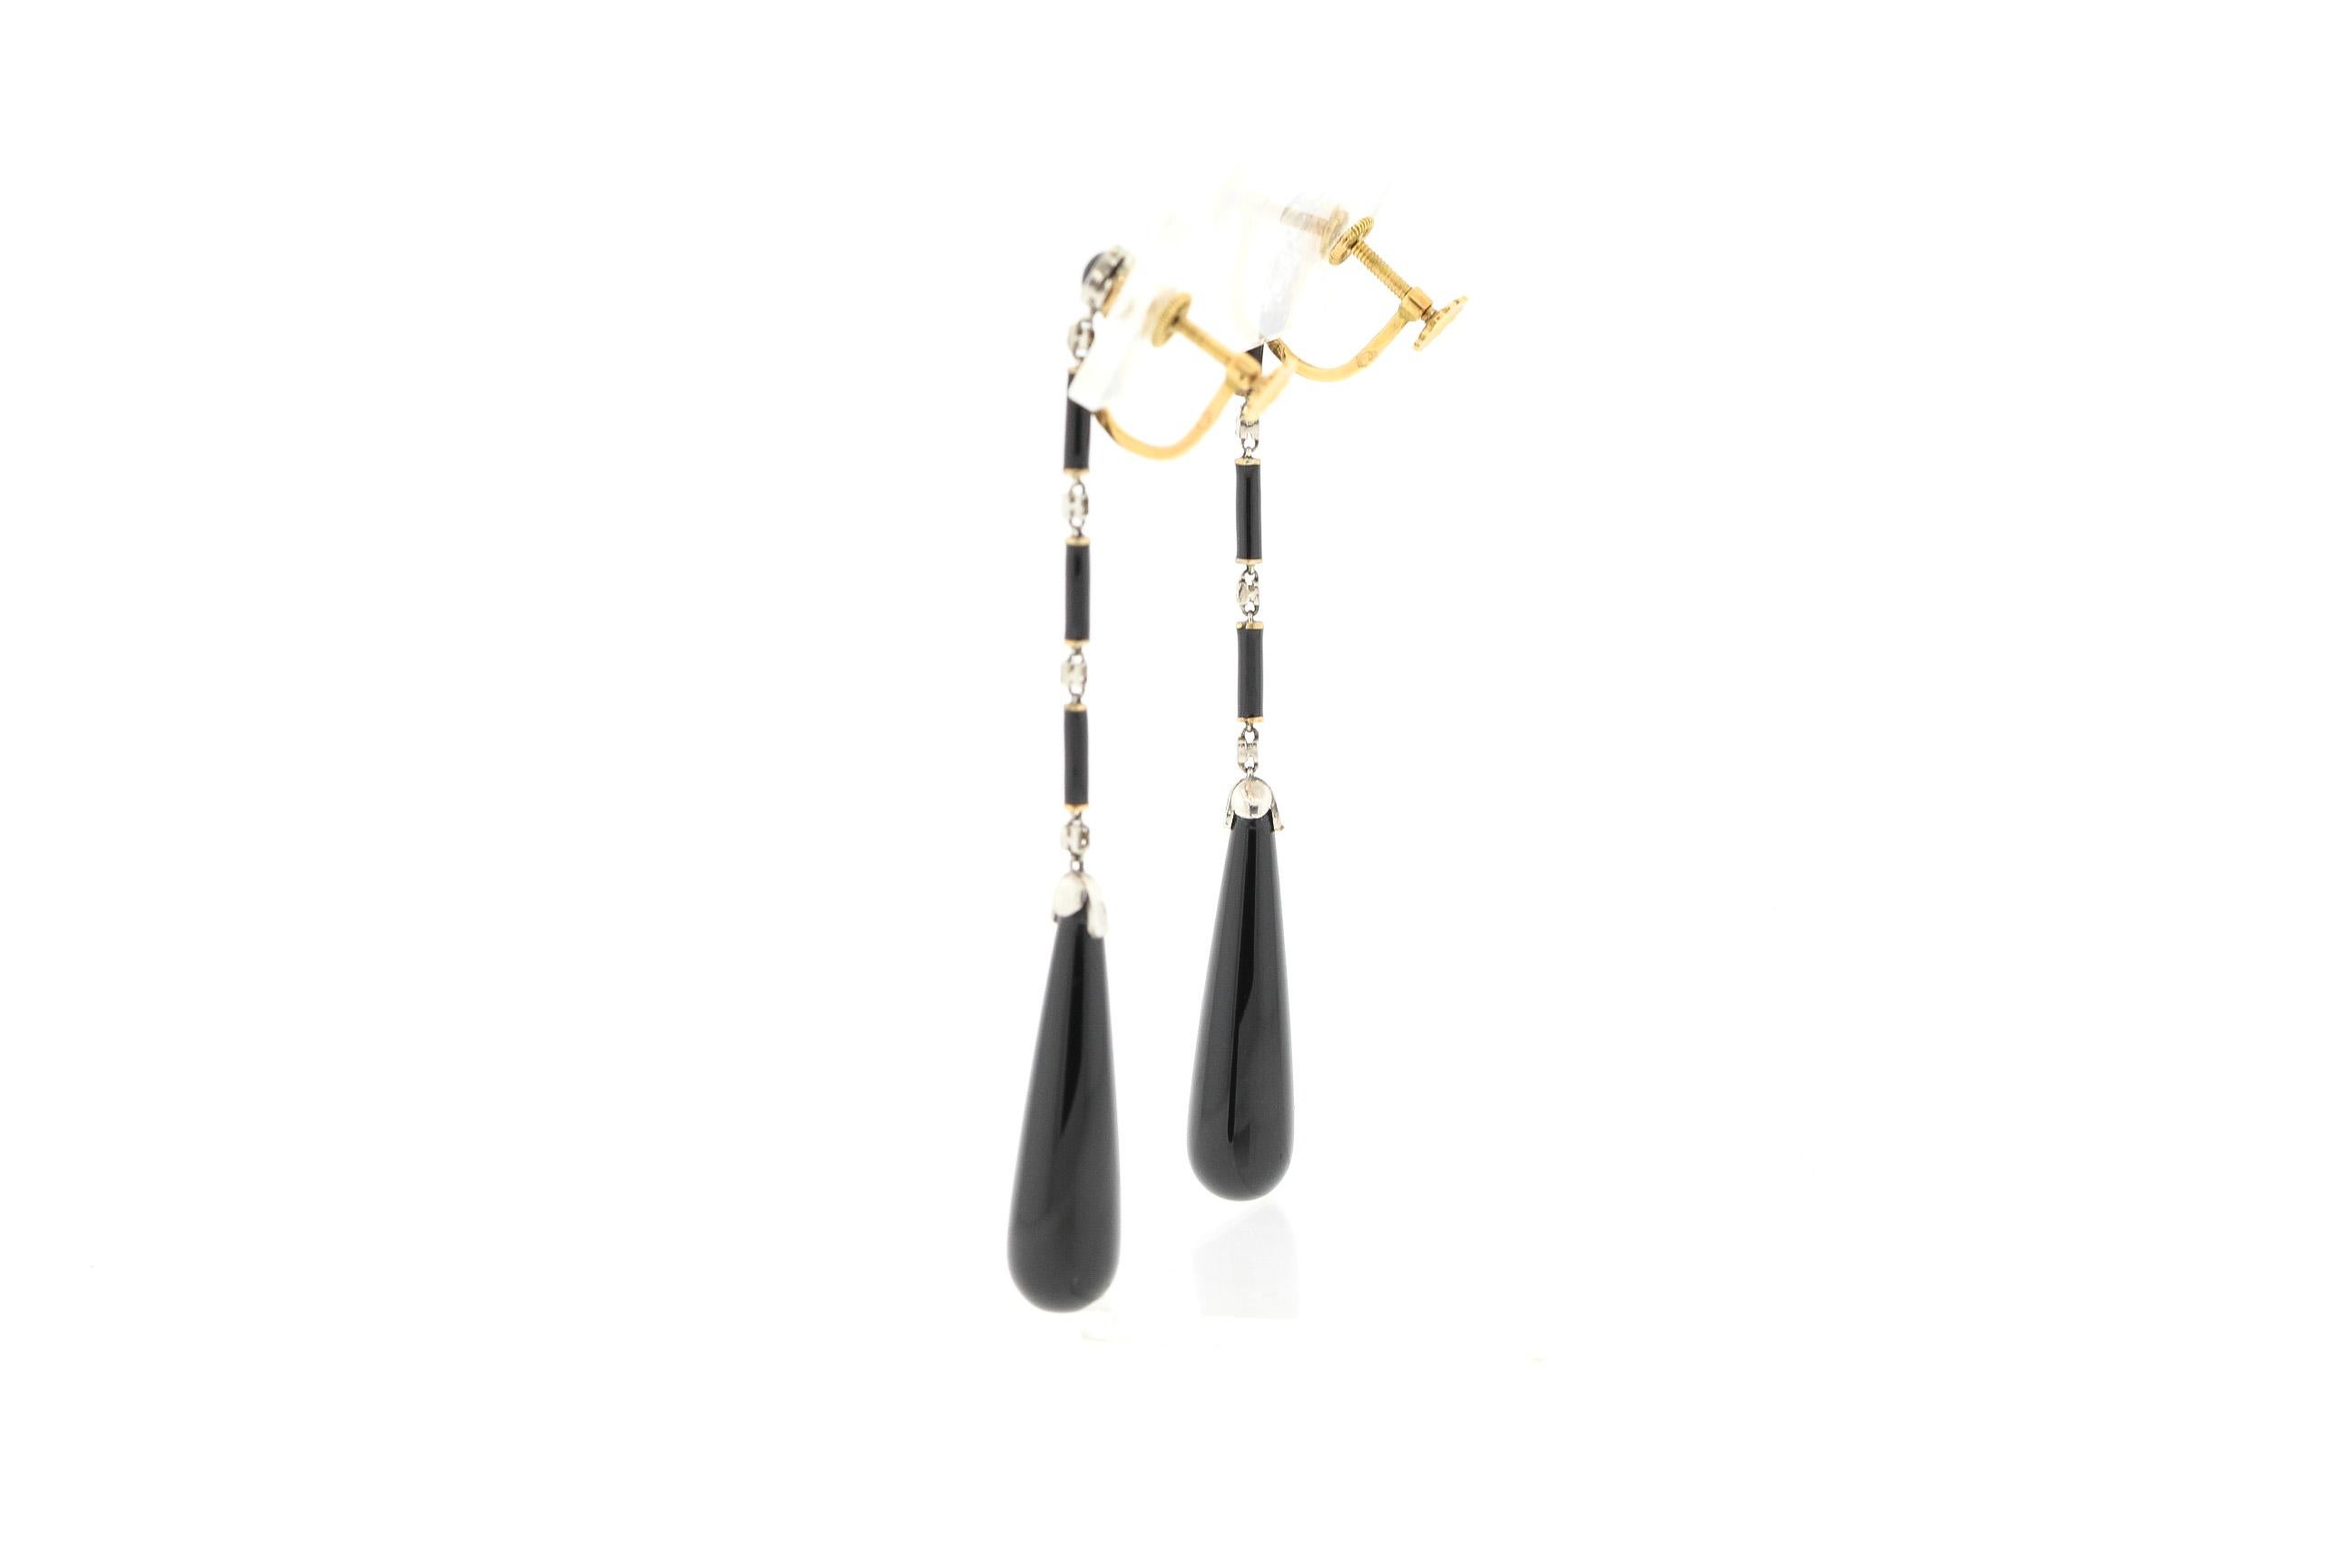 Antique dramatic onyx drop earrings set with small rosecut diamonds in platinum, circa 1910. The earrings are a definite stylistic lead in to the Art Deco era with the popularity of long swinging earrings. They have screw backs, that can be easily